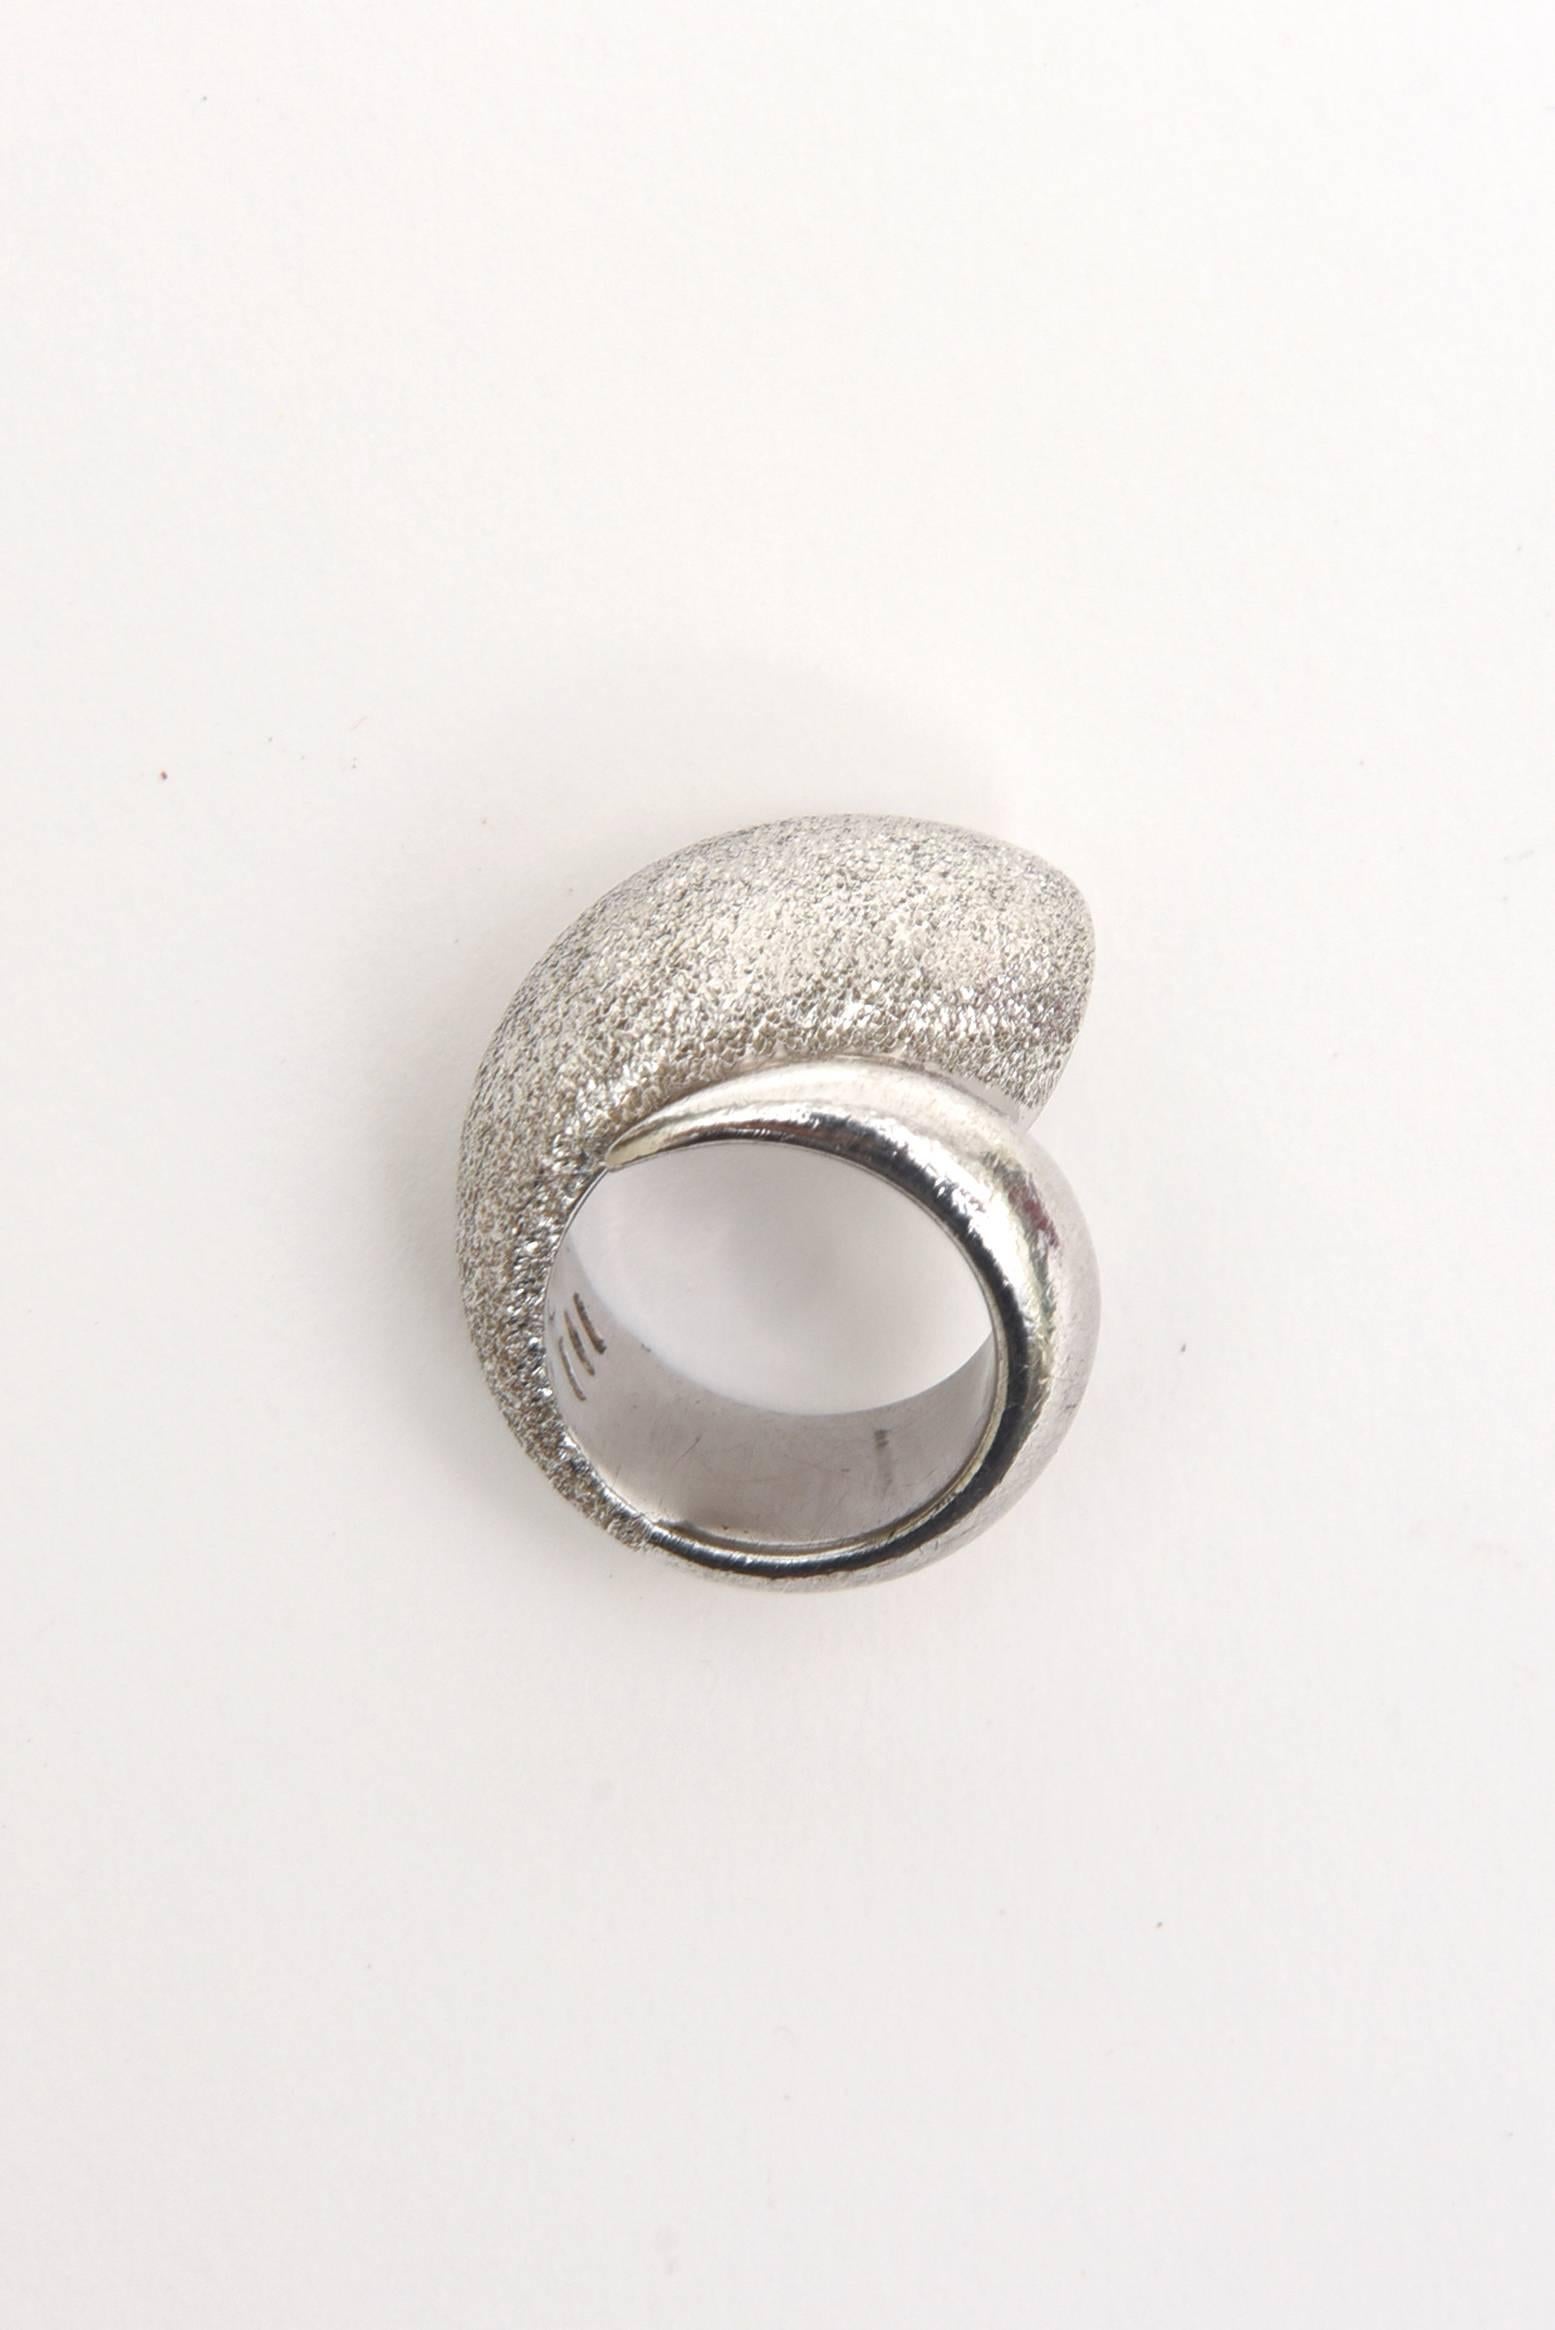  This Italian dome like ring is the combination of brushed sterling silver and polished sterling silver. in this sculptural ring it is from the house of Pianegonda. The brushed sterling looks like white gold. The width of the band in the back is